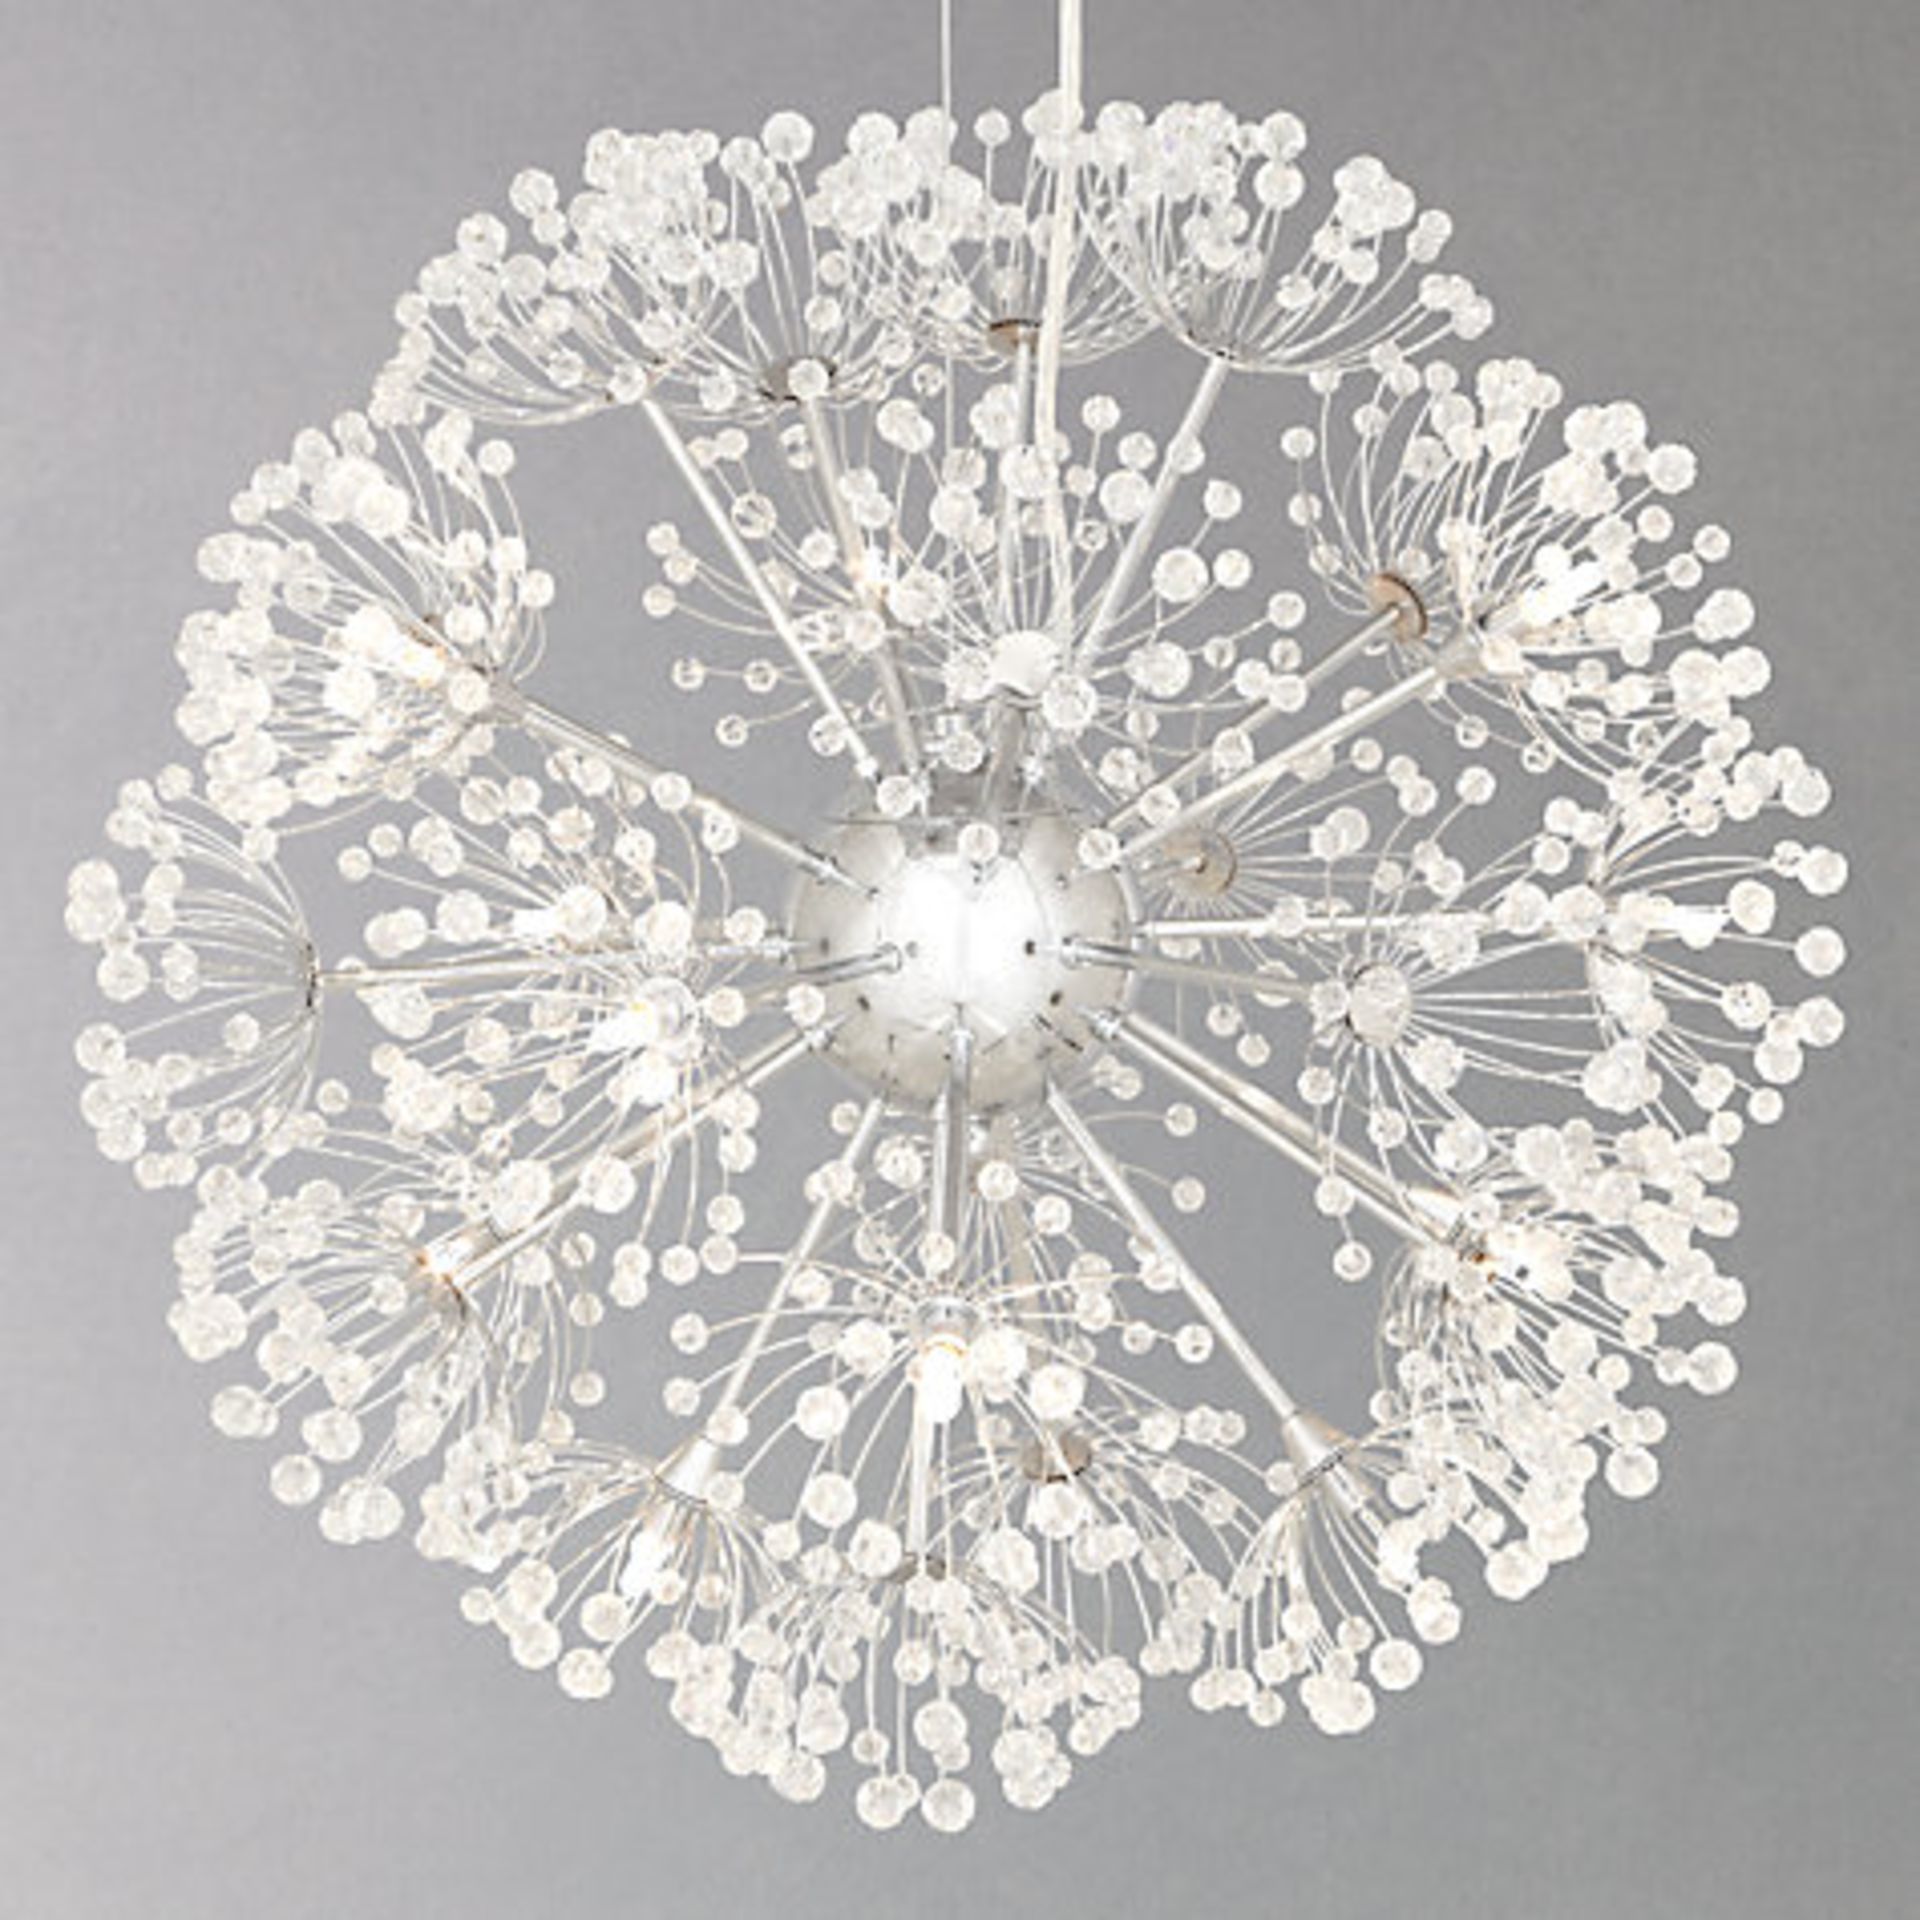 1 x BOXED ALIUM CEILING LIGHT RRP £350 10.05.17 *PLEASE NOTE THAT THE BID PRICE IS MULTIPLIED BY THE